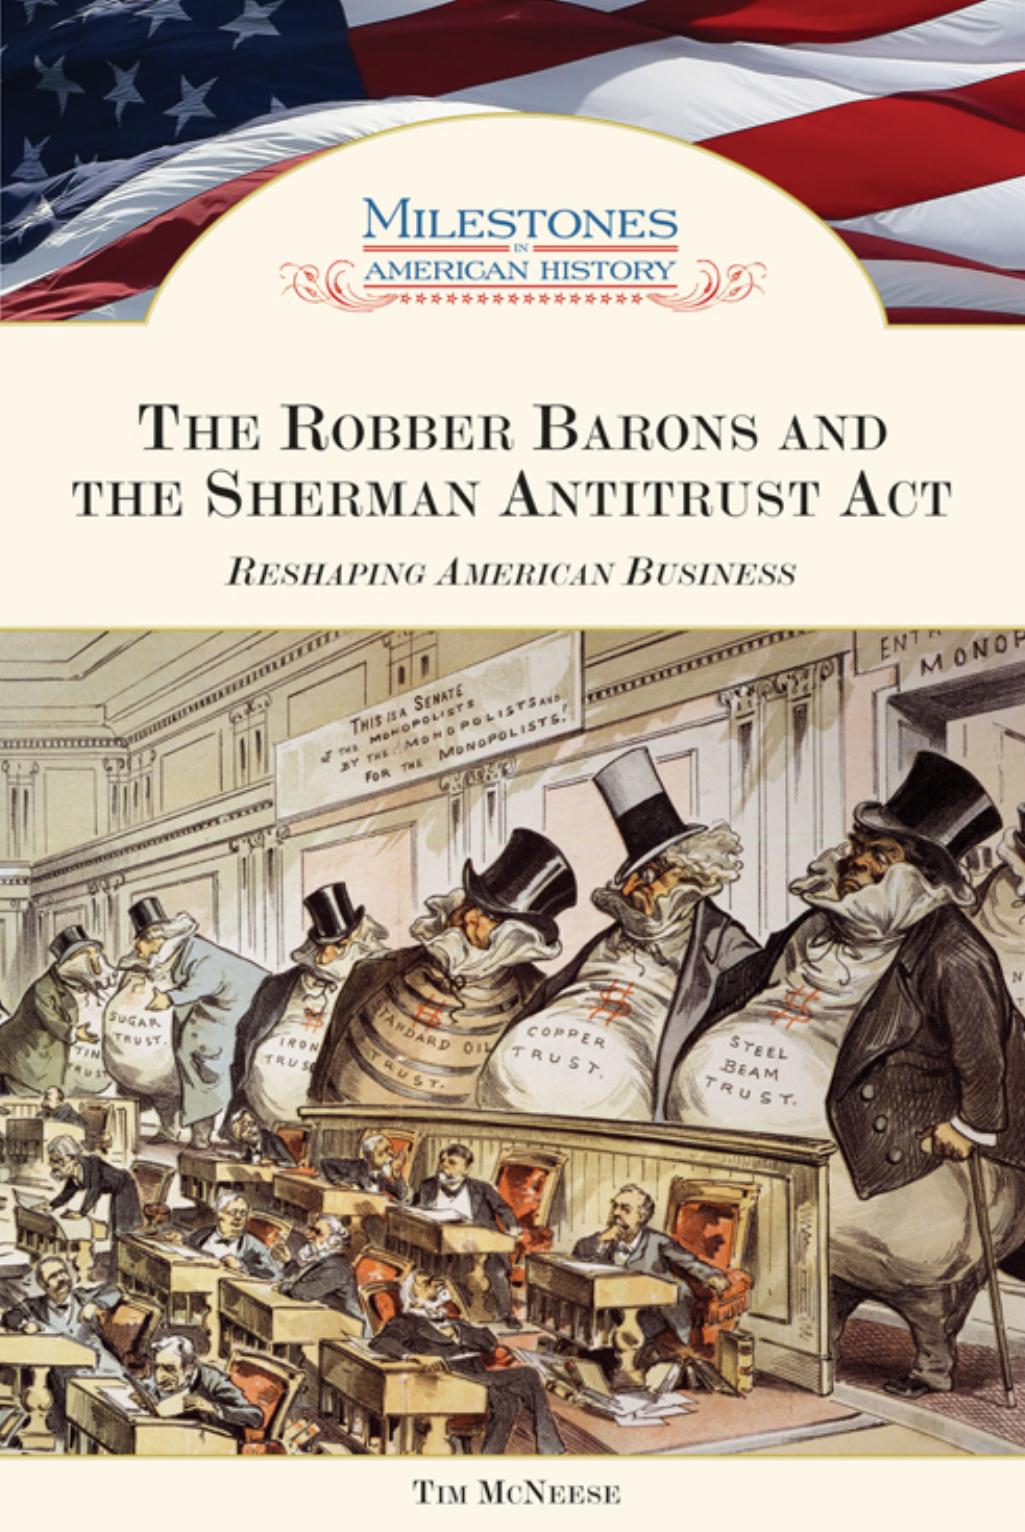 The Robber Barons and the Sherman Antitrust Act: Reshaping American Business